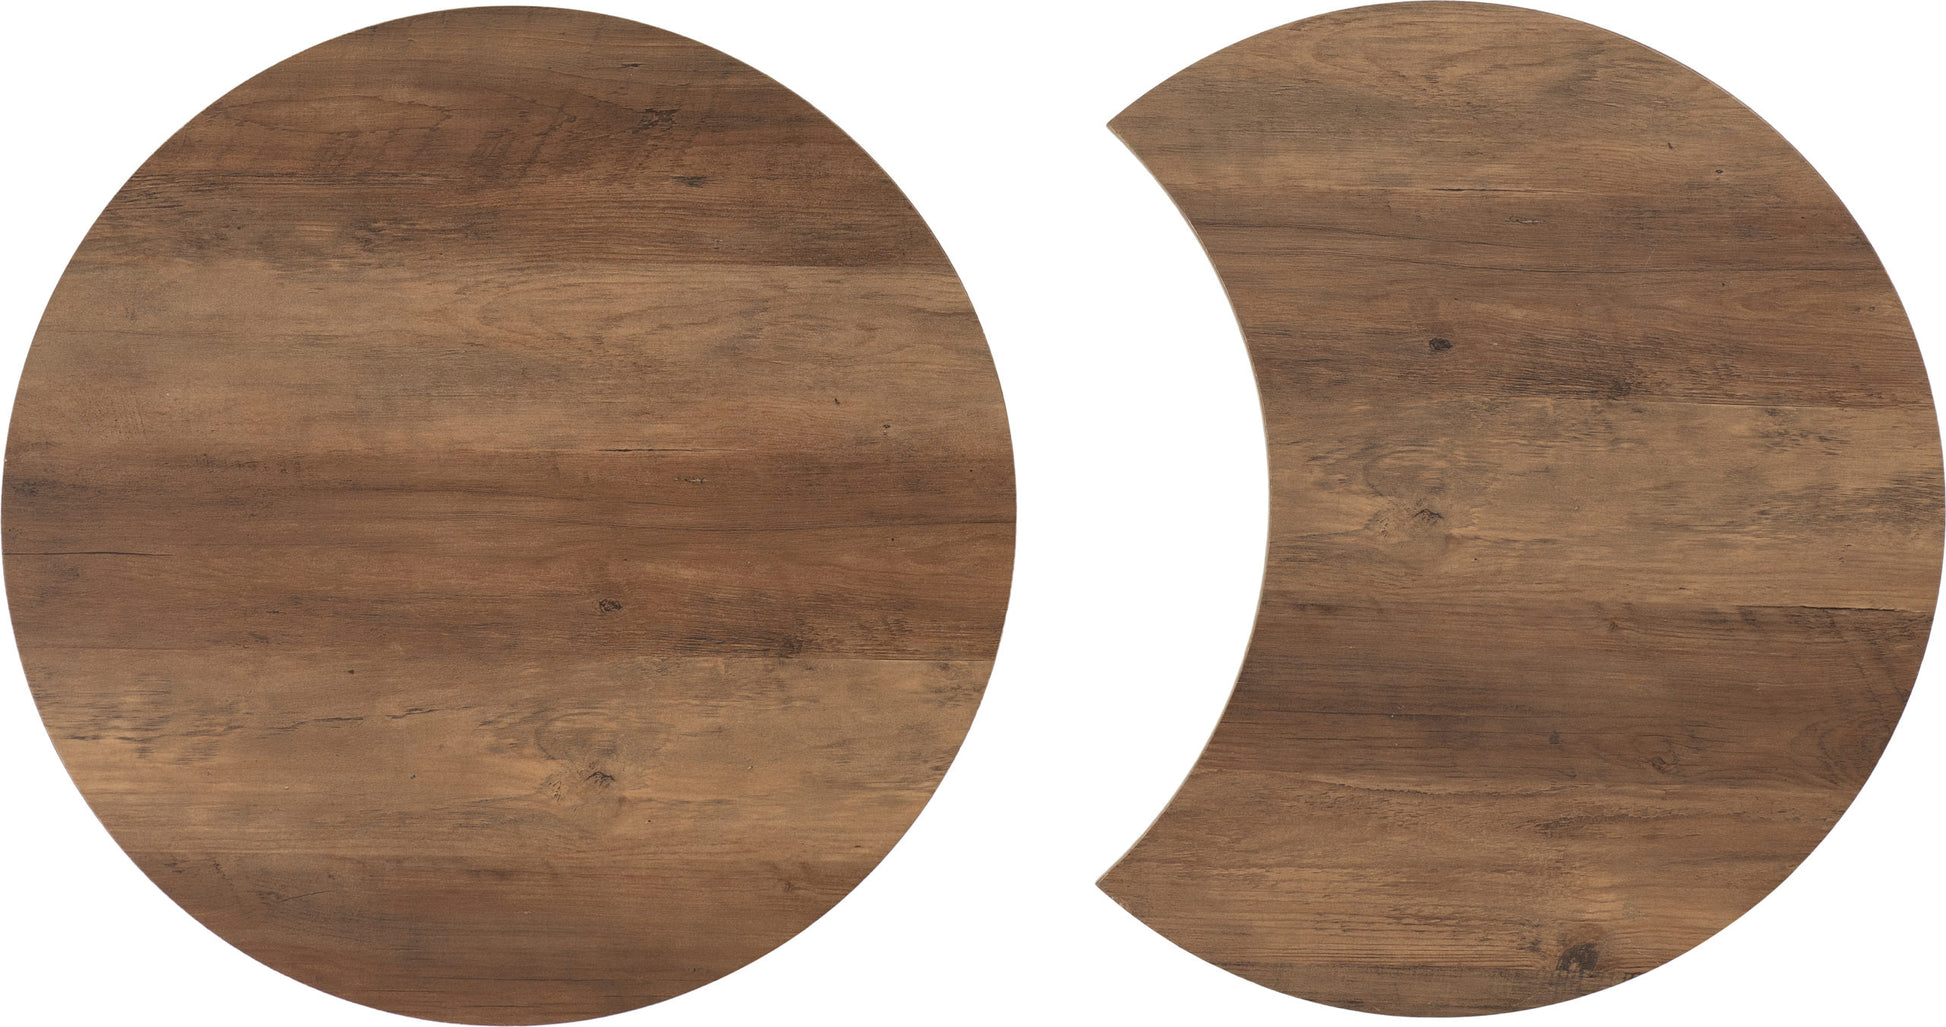 Athens Duo Coffee Table Set Medium Oak Effect/Black- The Right Buy Store